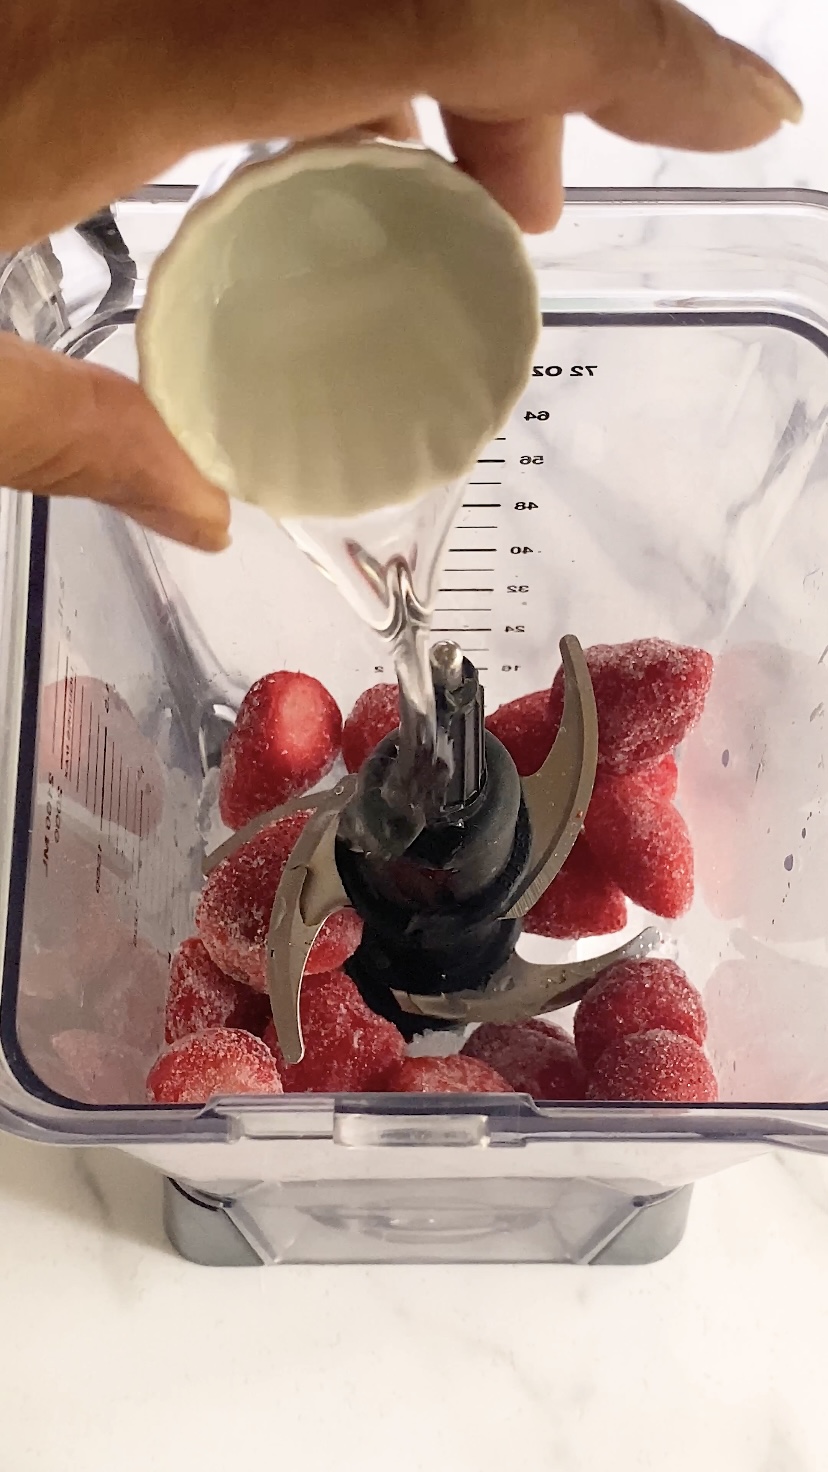 Adding simple syrup to a blender of strawberries.